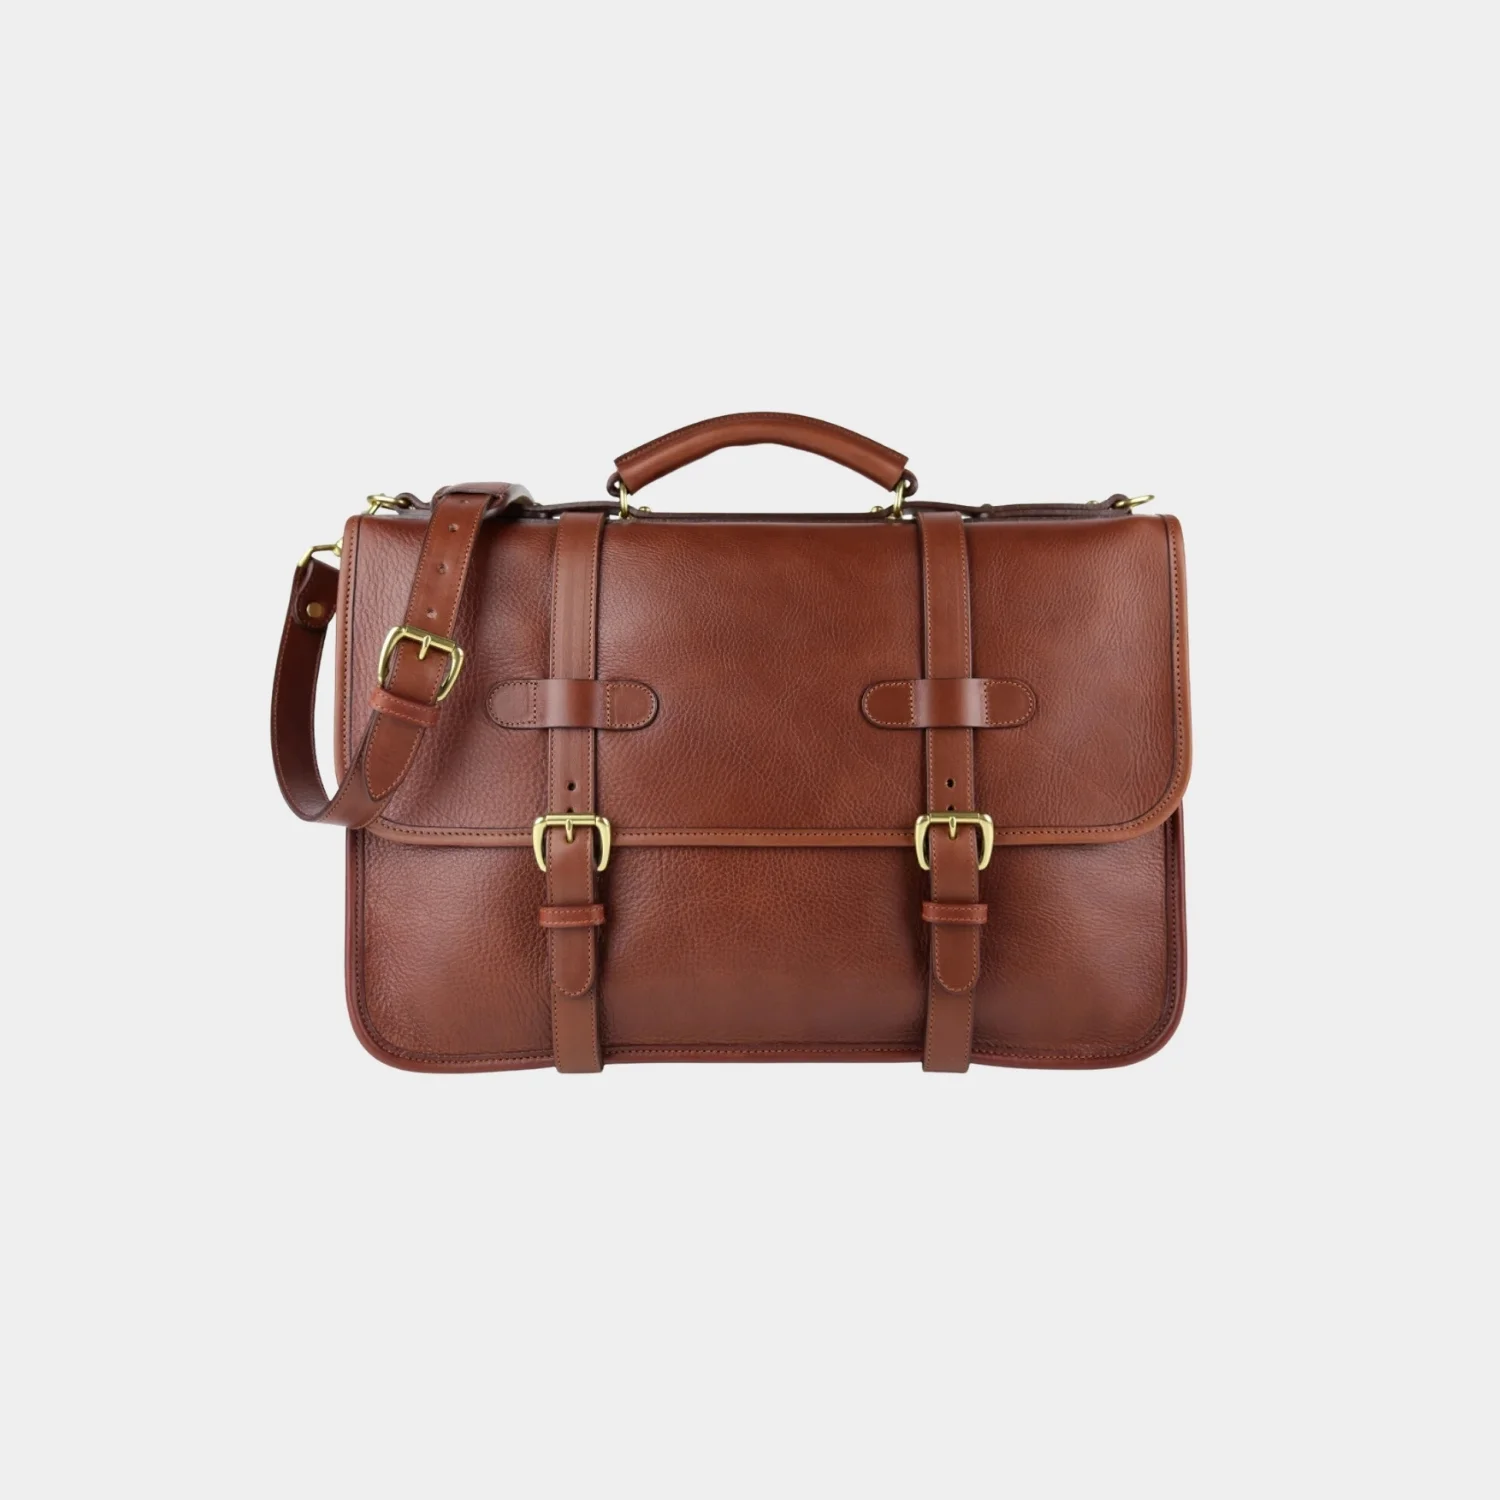 Classy American Style Brown Leather Briefcase